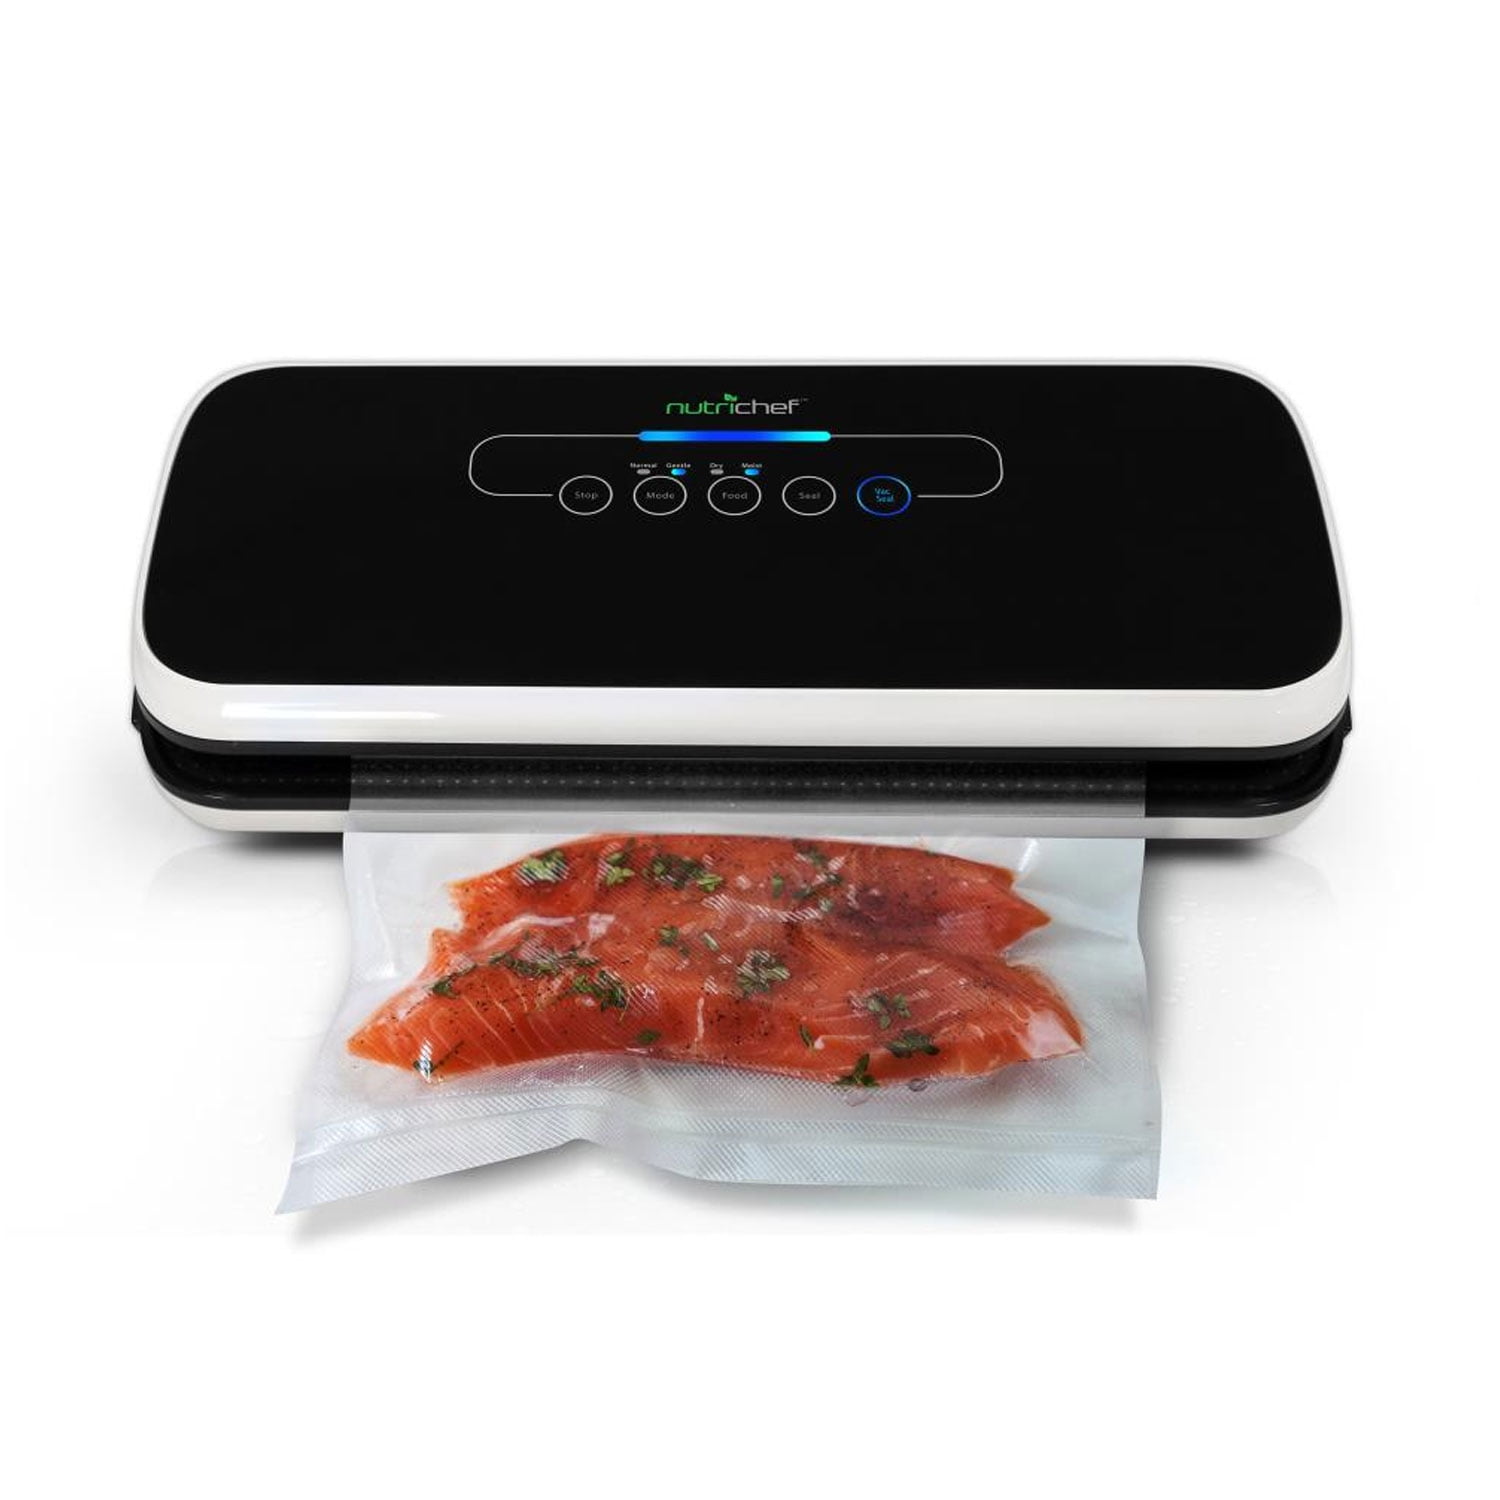 NutriChef Automatic Foodsaver System Air Seal Machine Chamber Vacuum Sealer